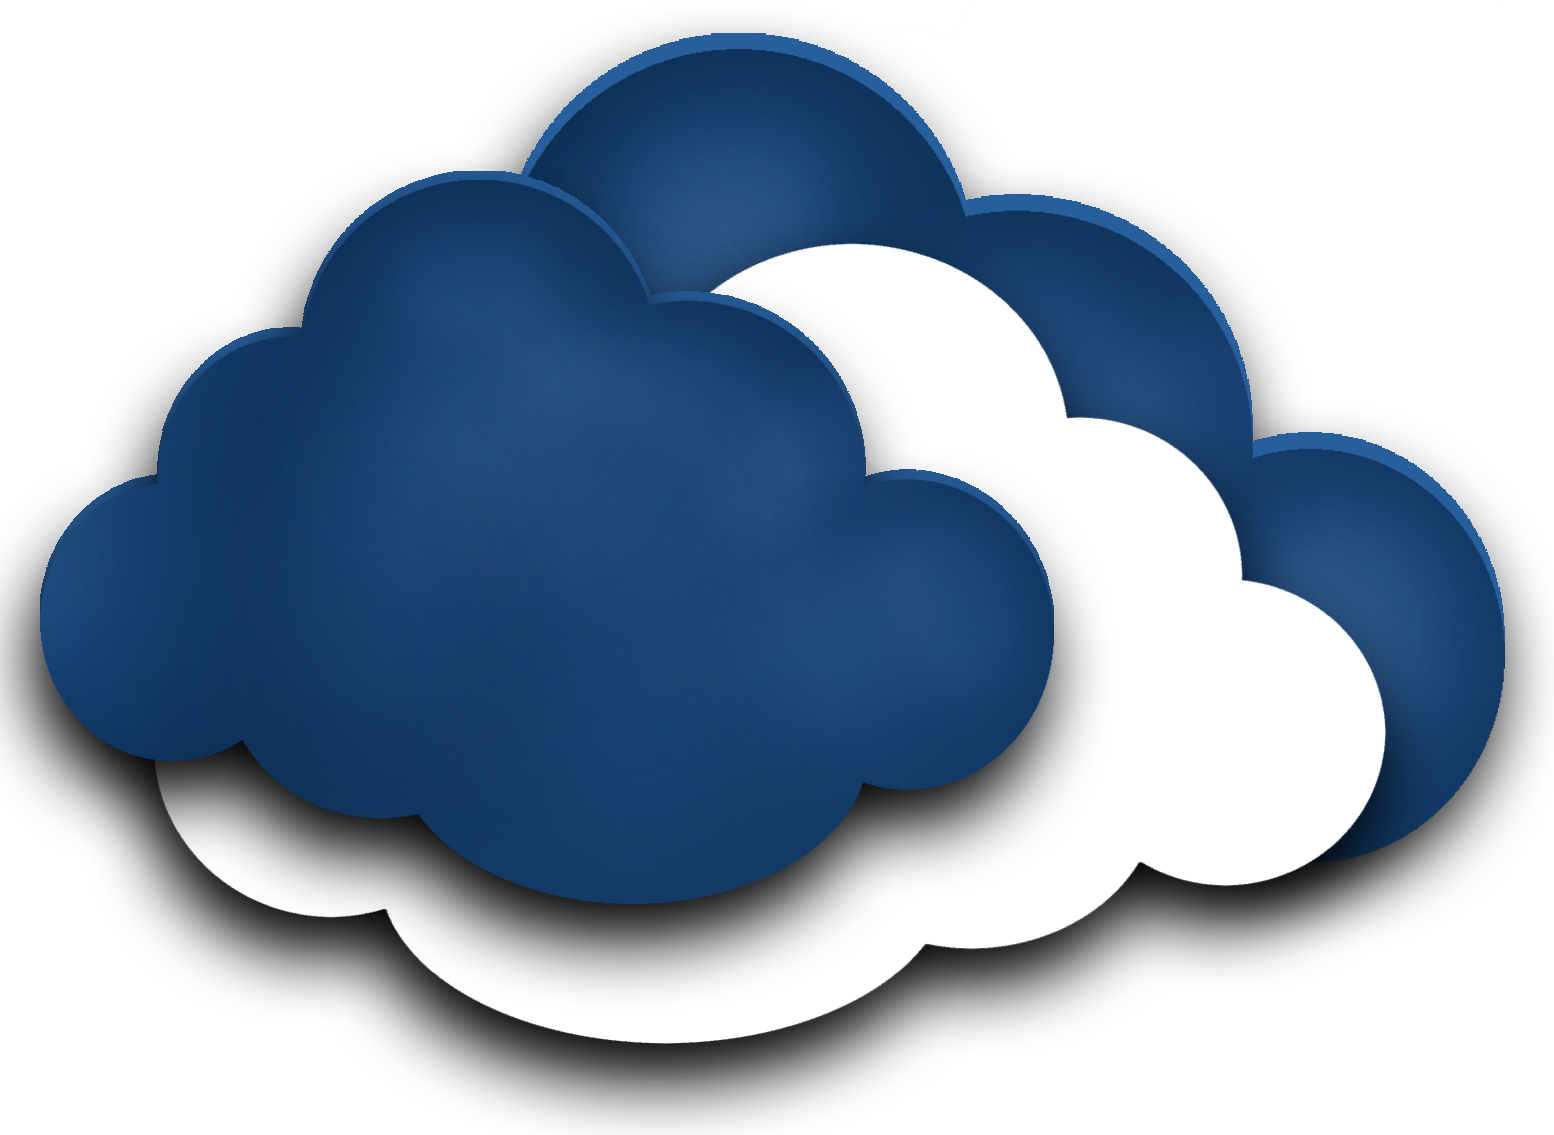 Free Cloud Png Images, Download Free Cloud Png Images png images, Free